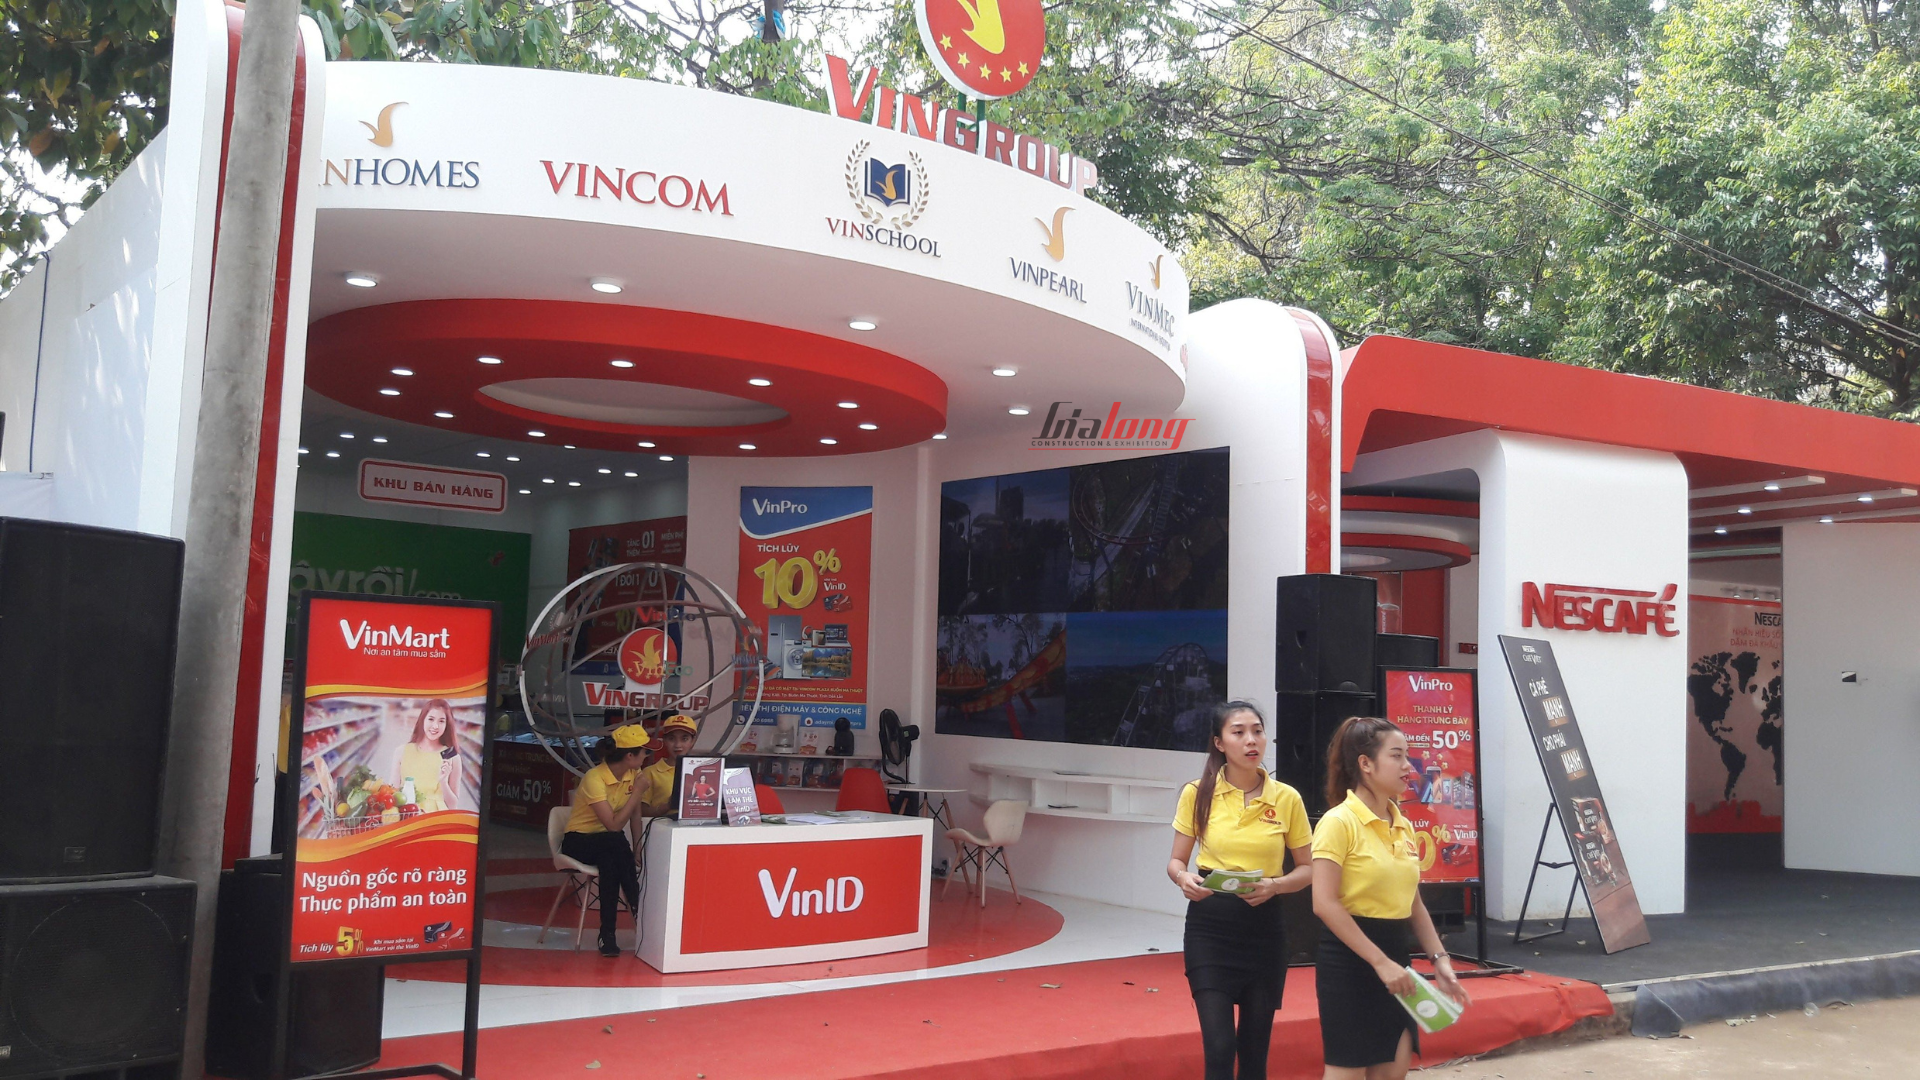 VINGROUP - The booth was constructed and designed by Gia Long